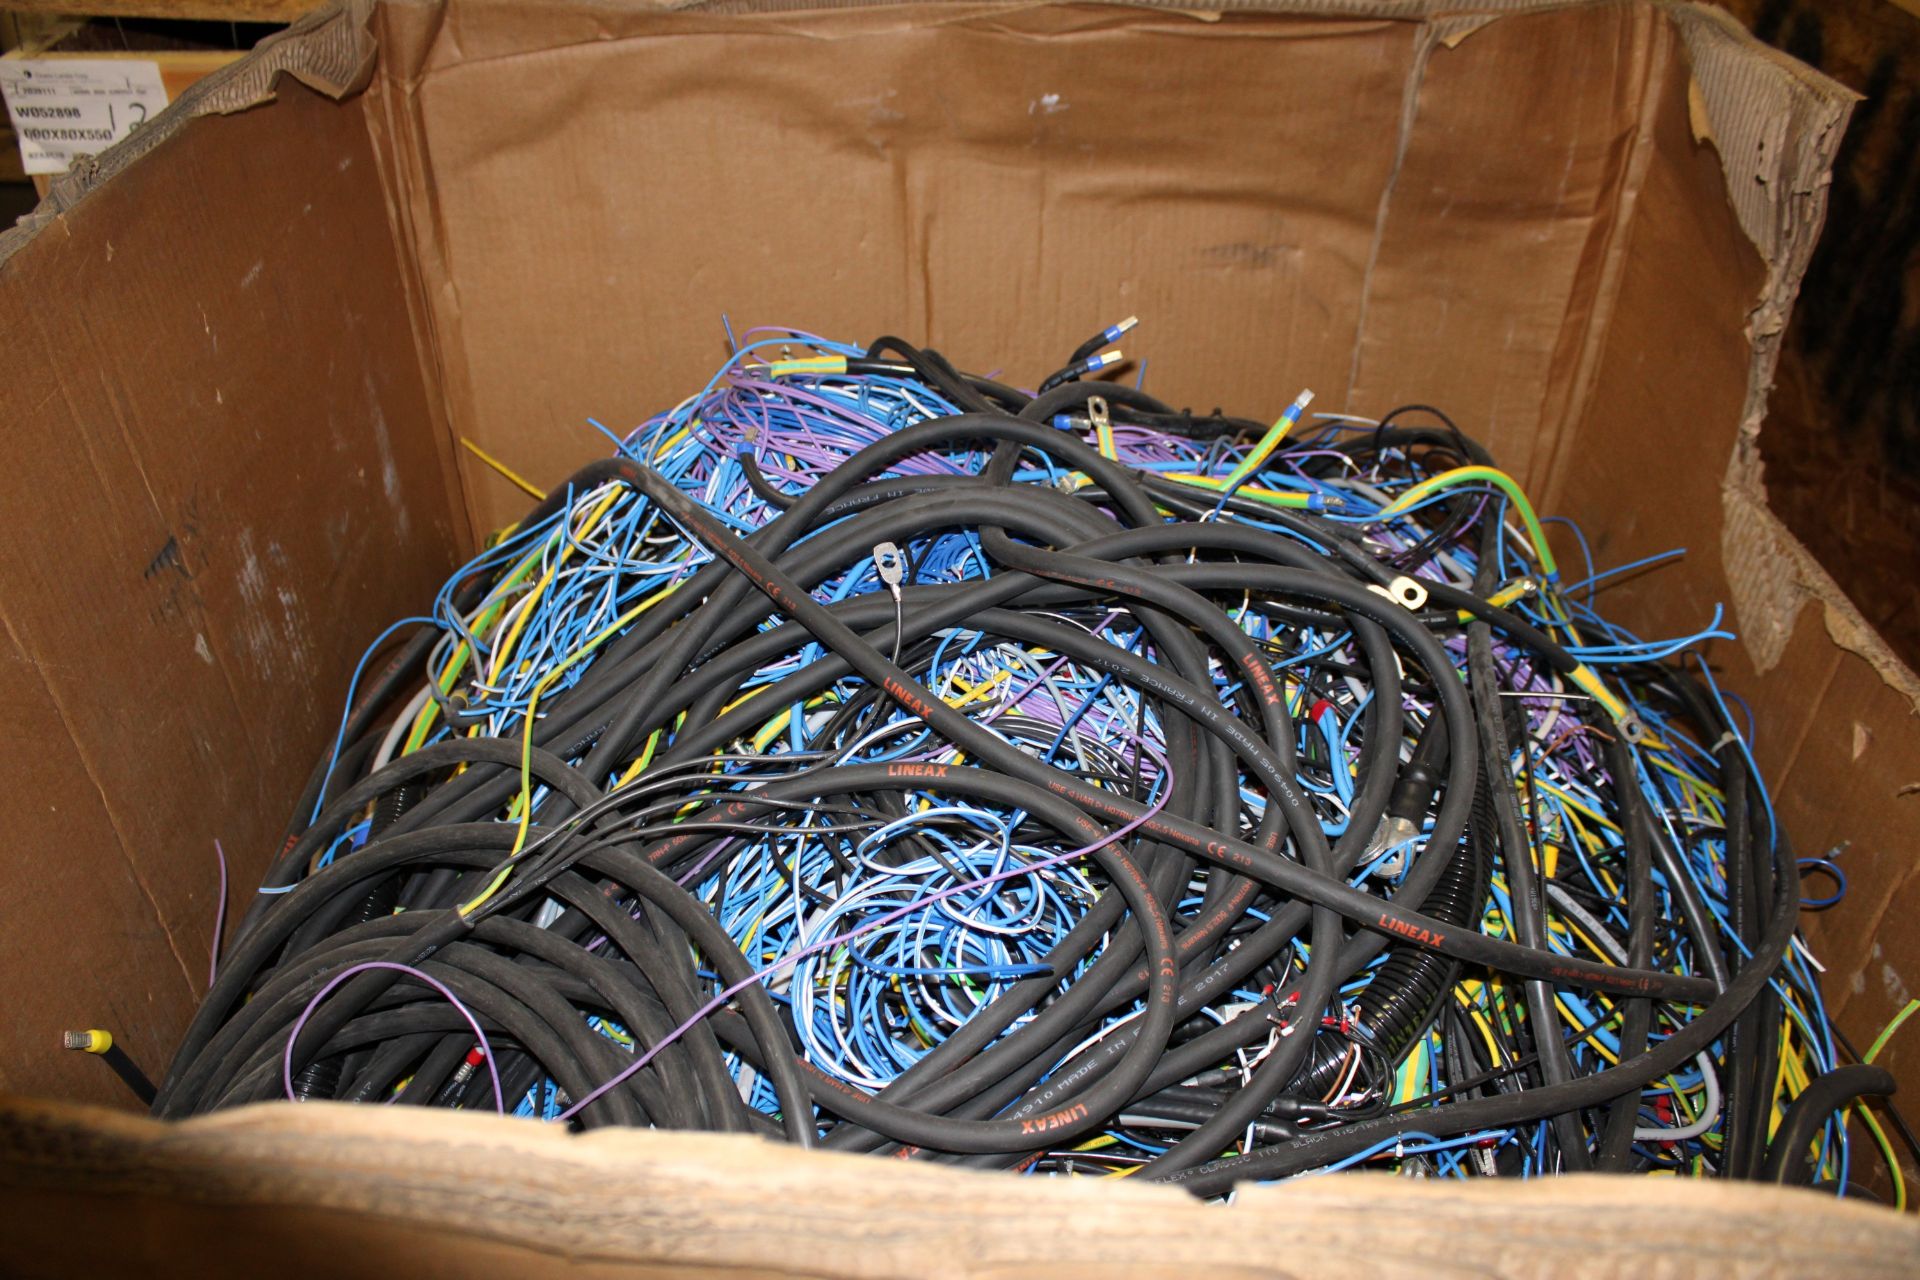 Contents of Box: Scrap Electrical Wire